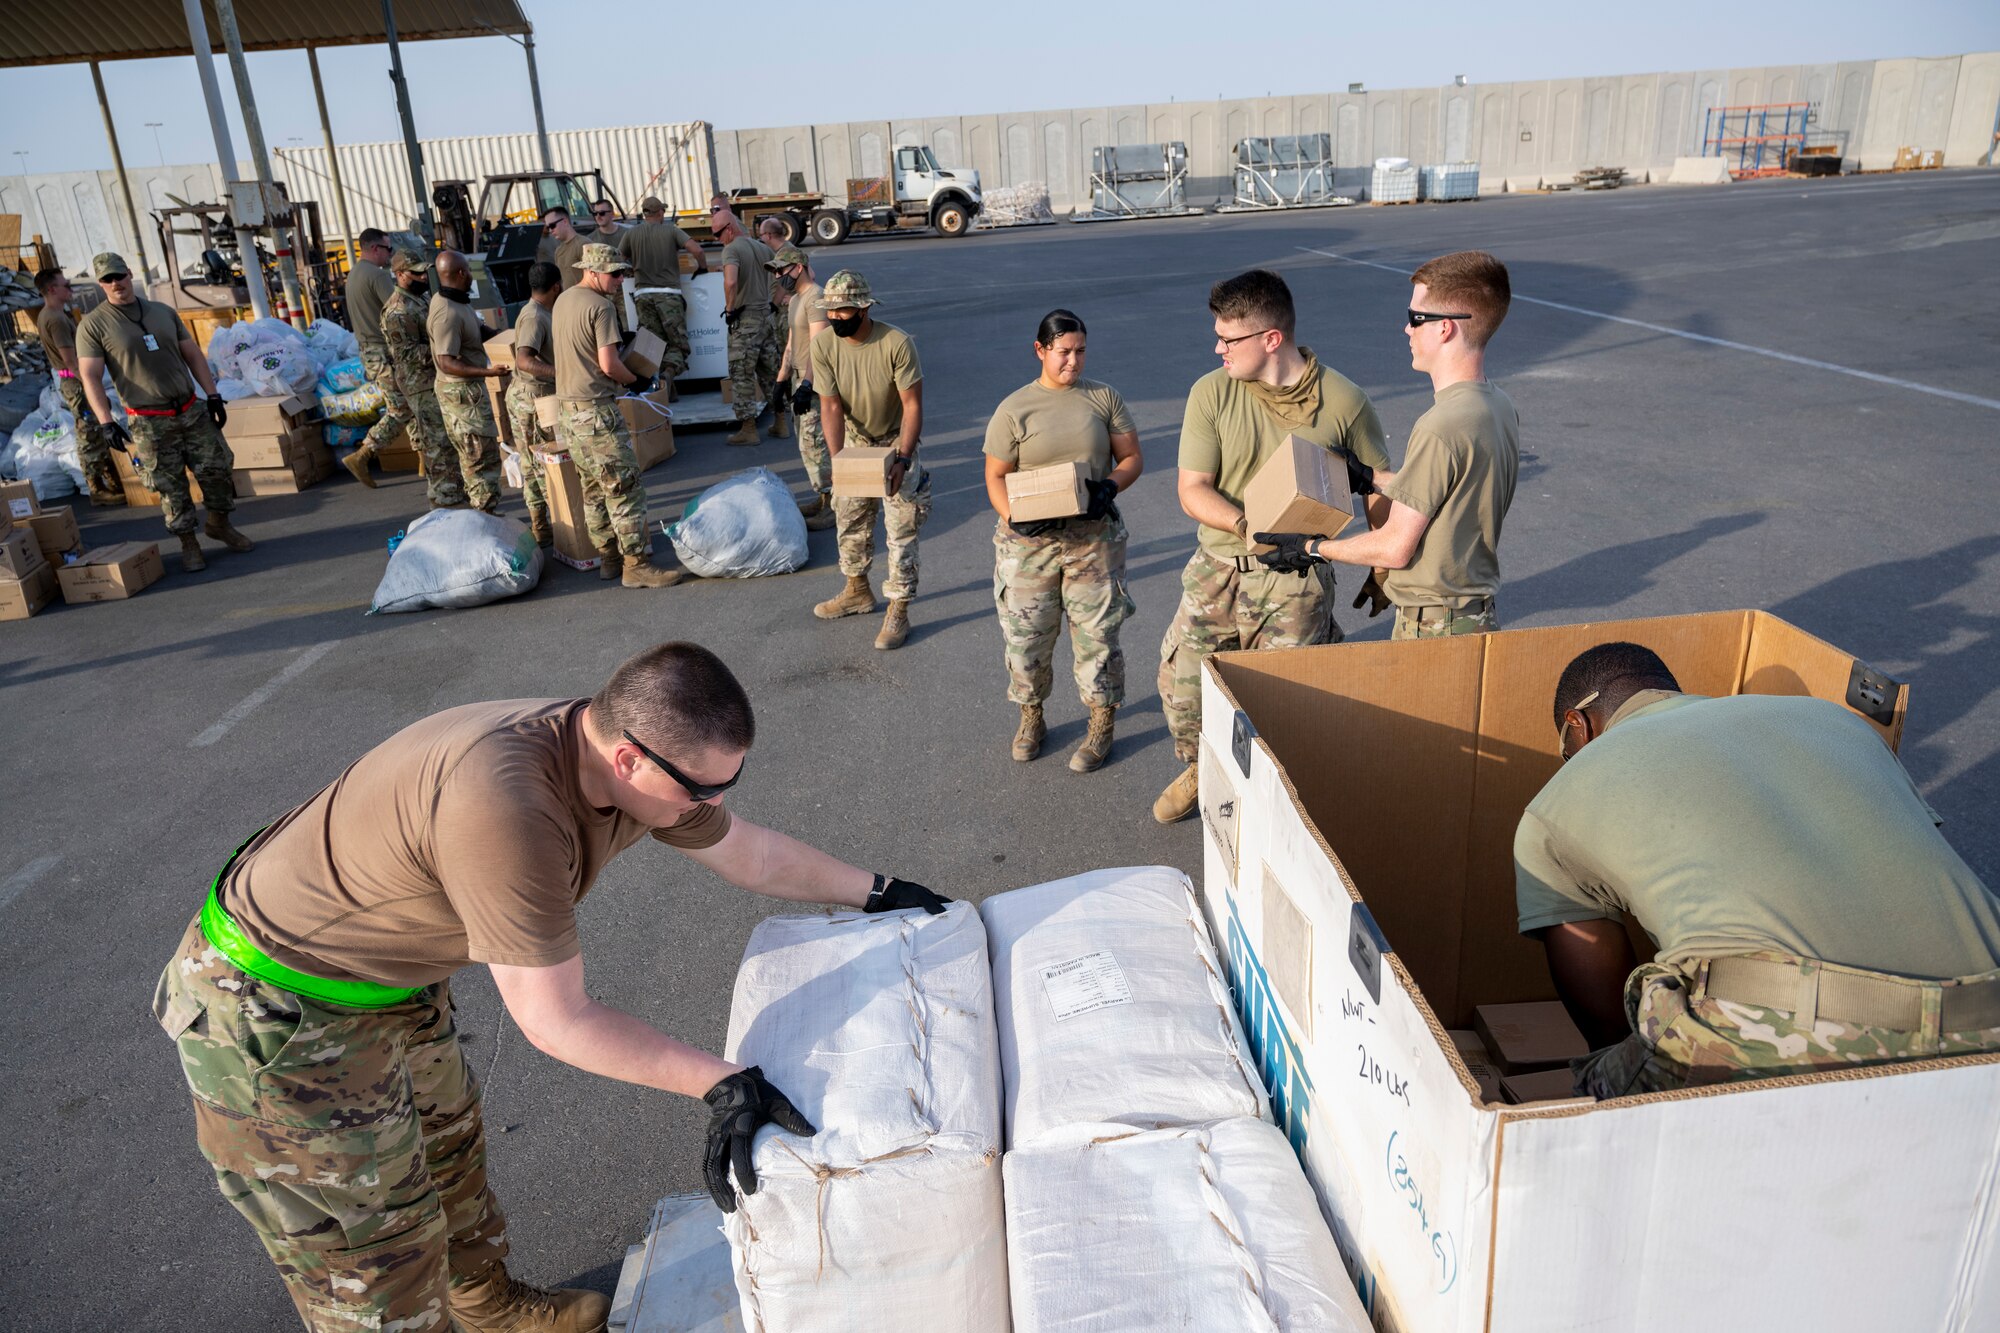 Airmen loading and packing pallets of humanitarian supplies